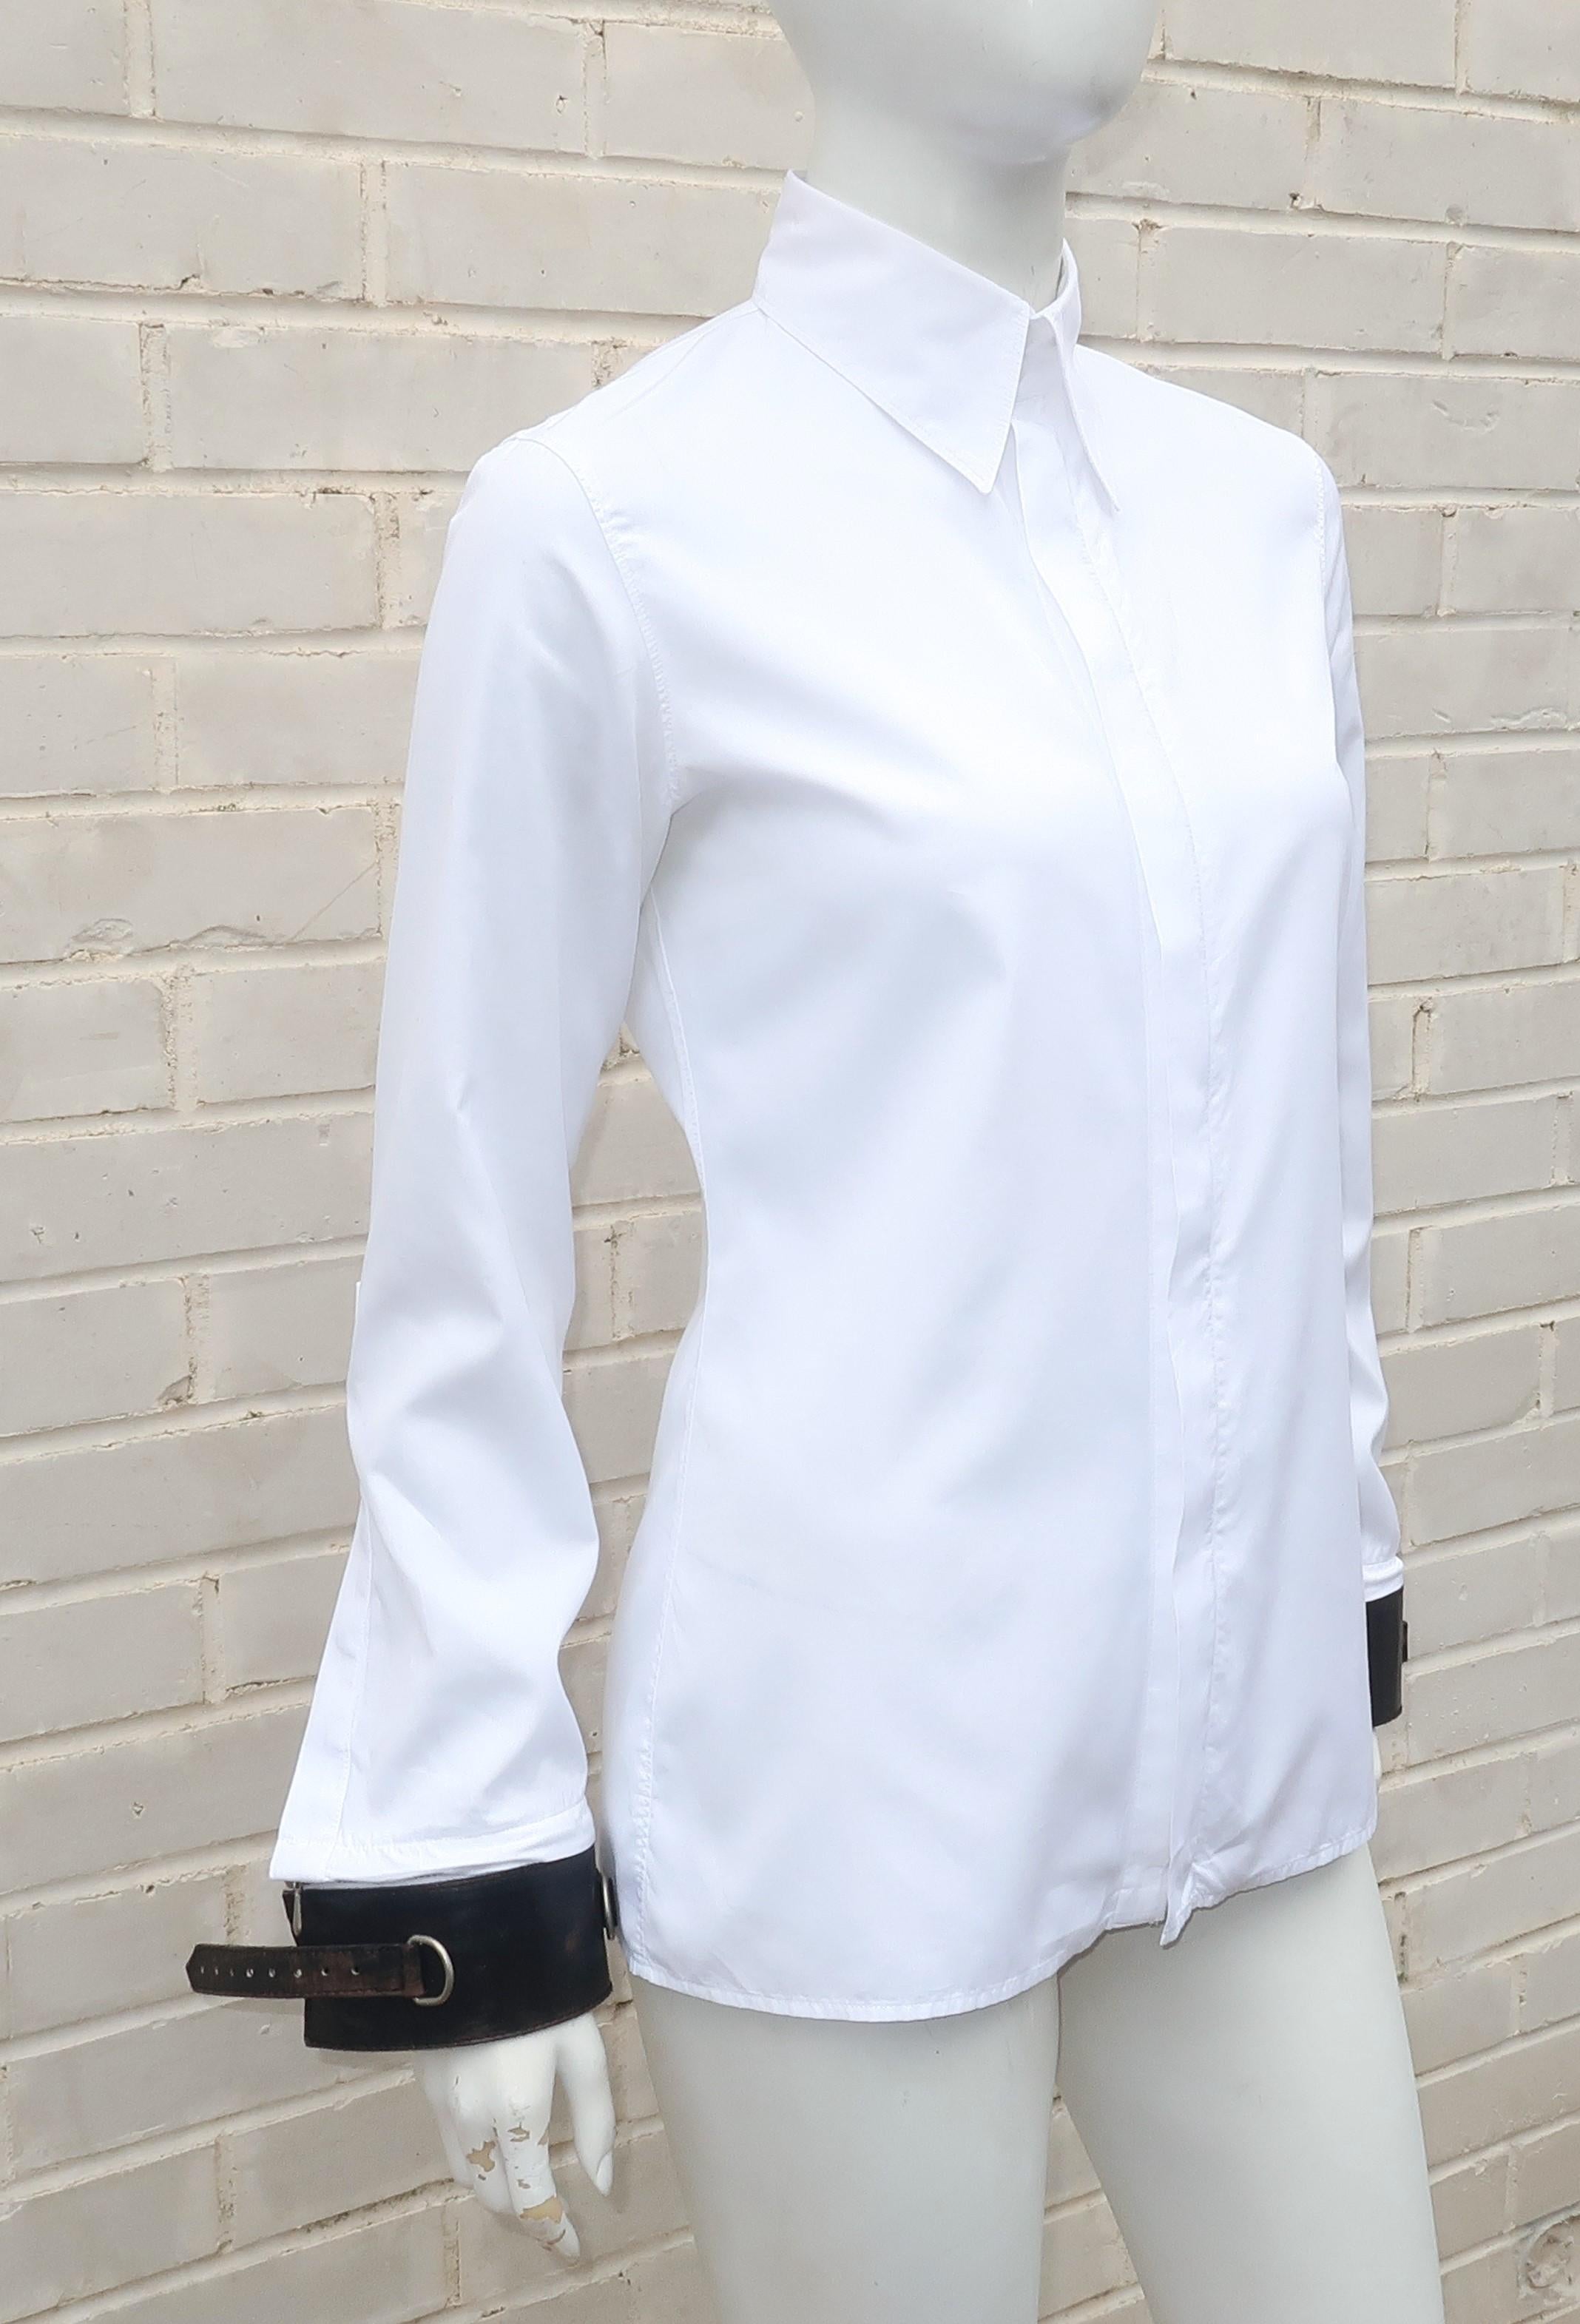 Jean Paul Gaultier White Shirt With Black Leather Restraint Cuffs  1